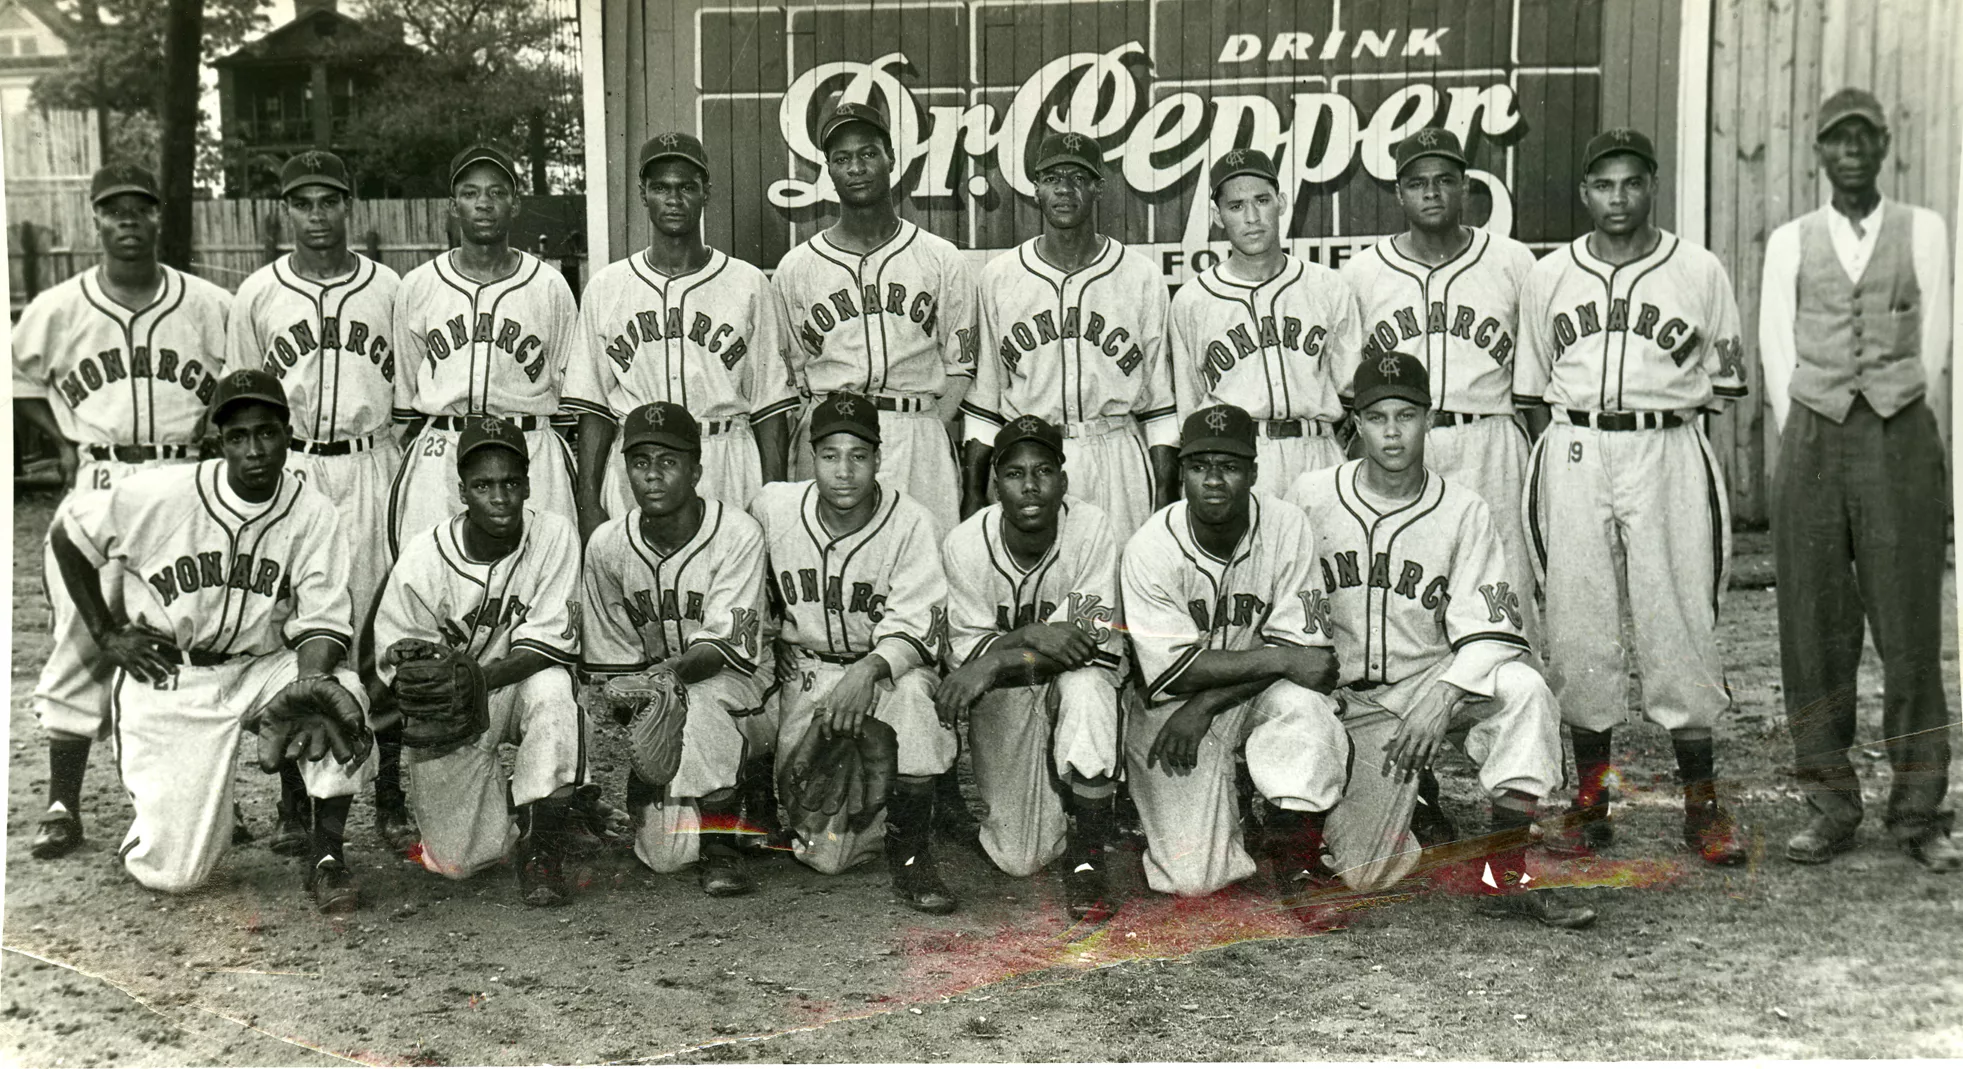 This small Nebraska town hosted Negro League clubs and possibly an